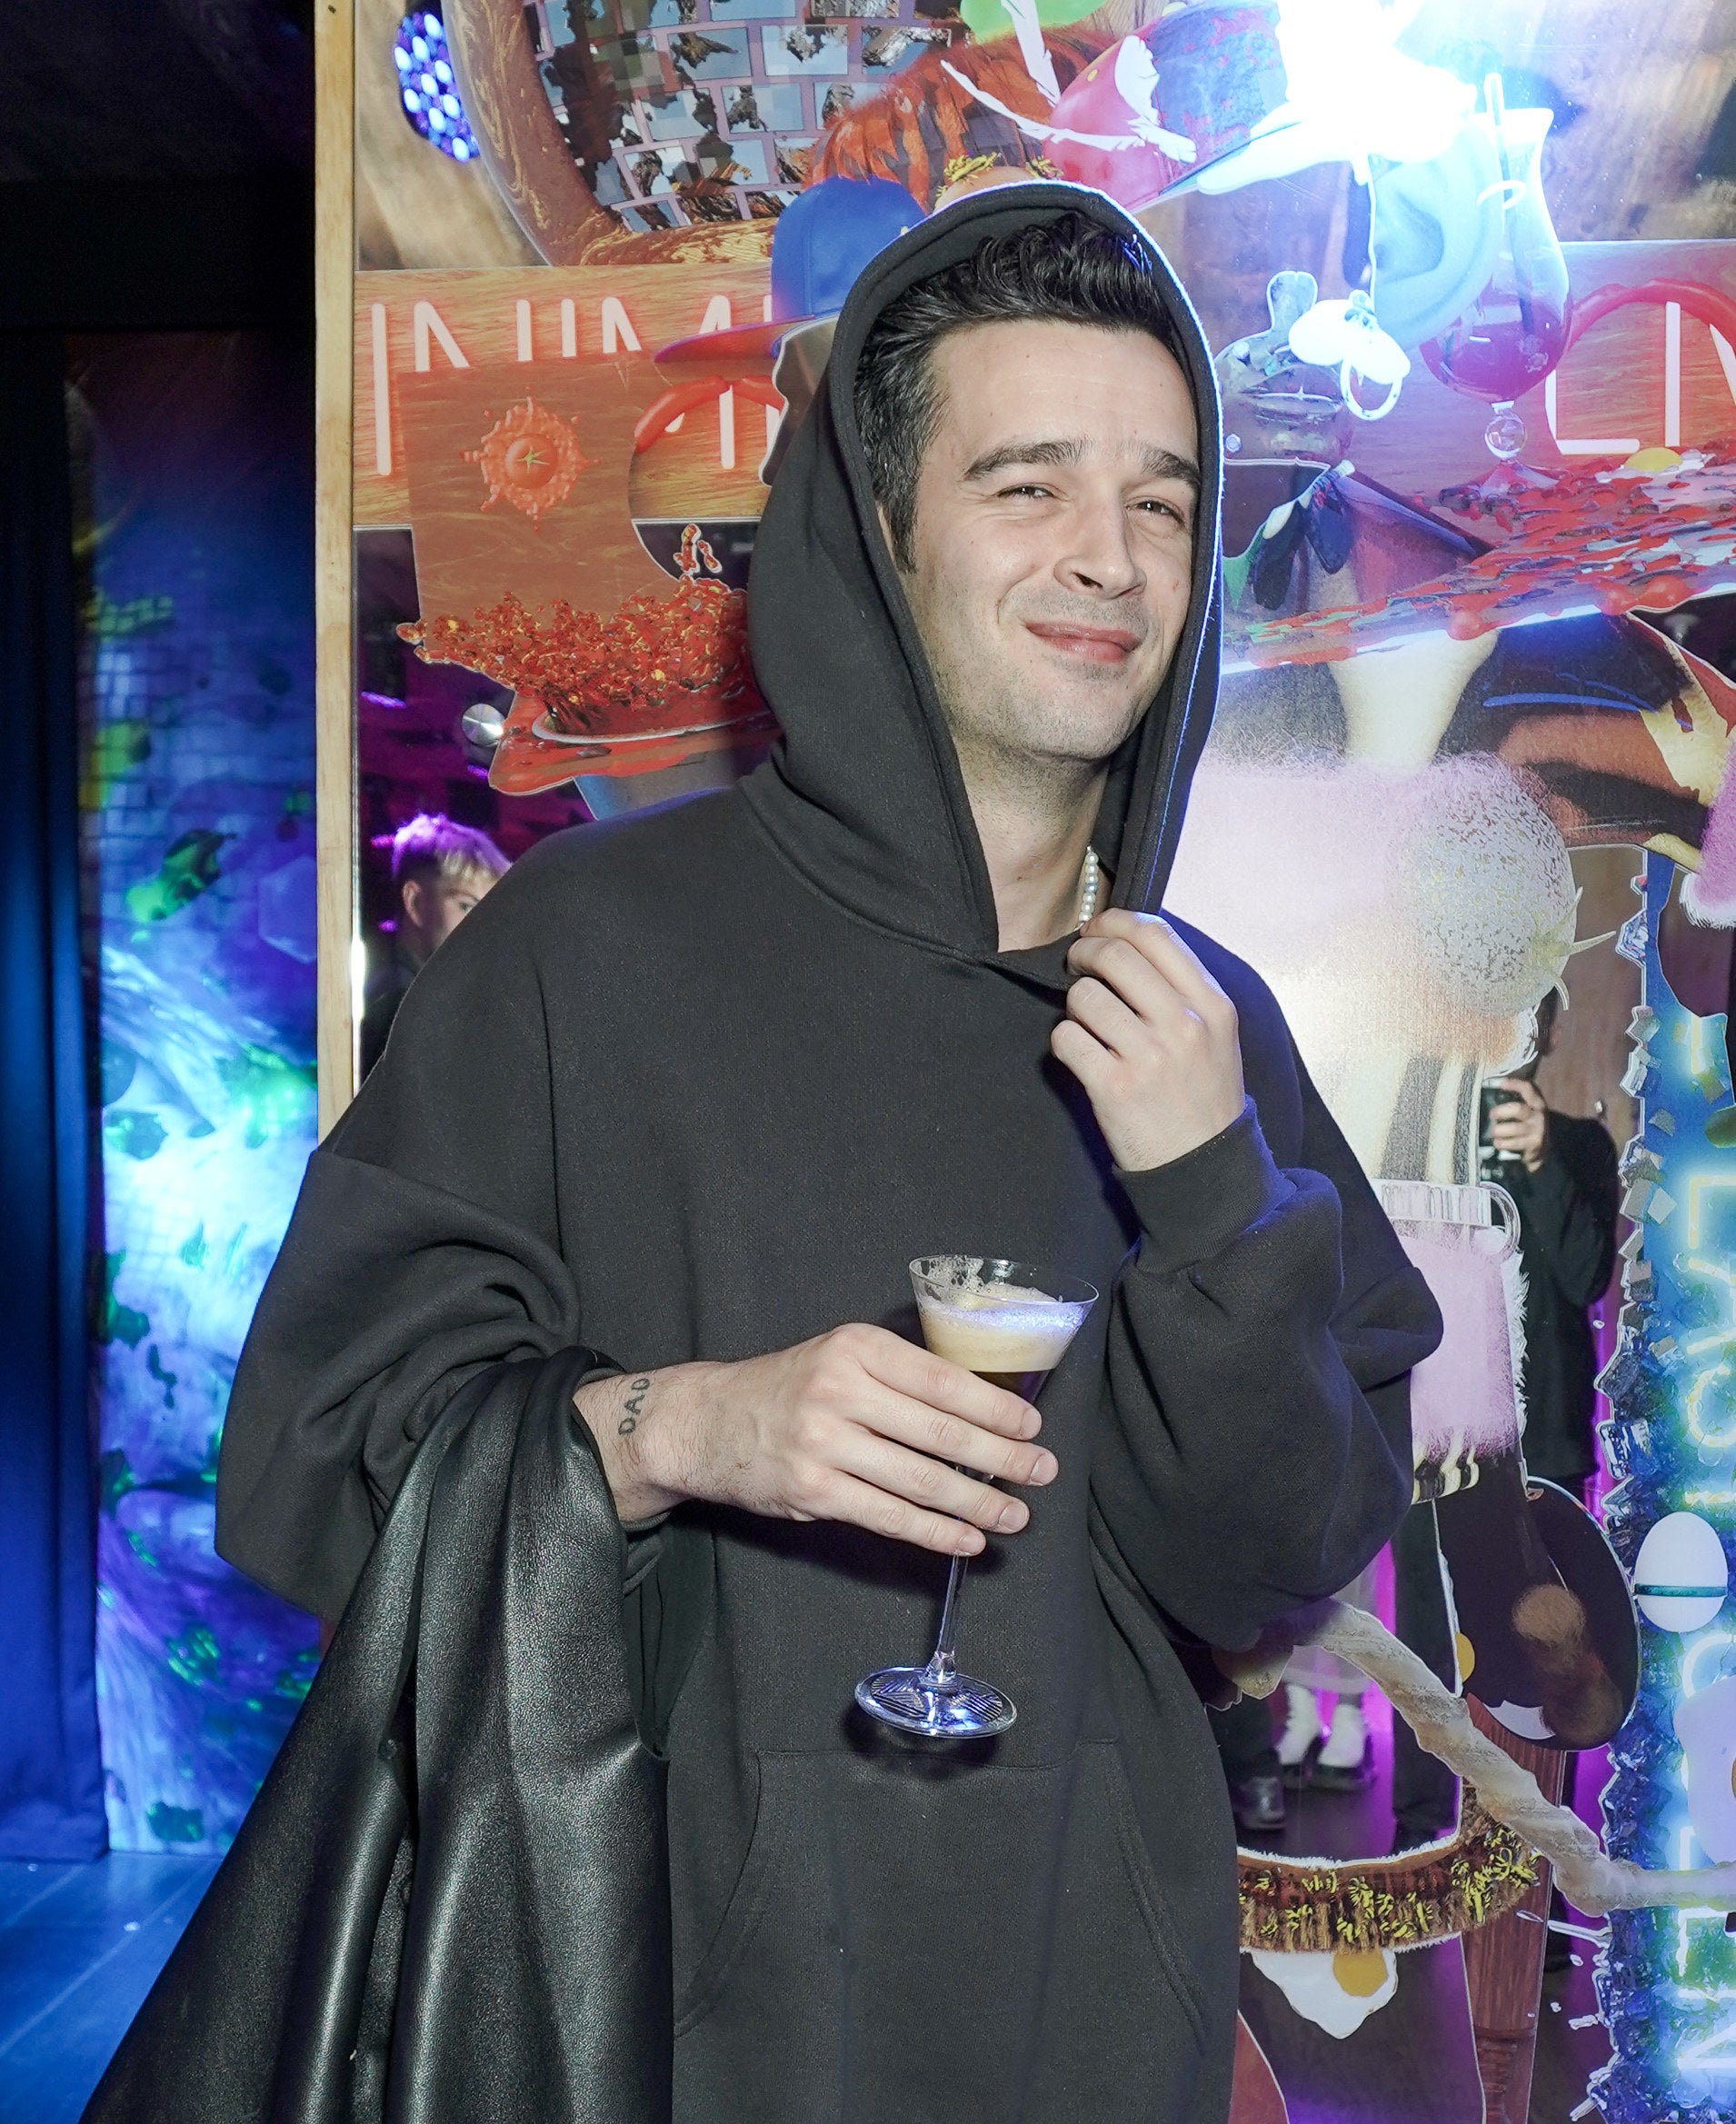 Matty in a hoodie and holding a drink